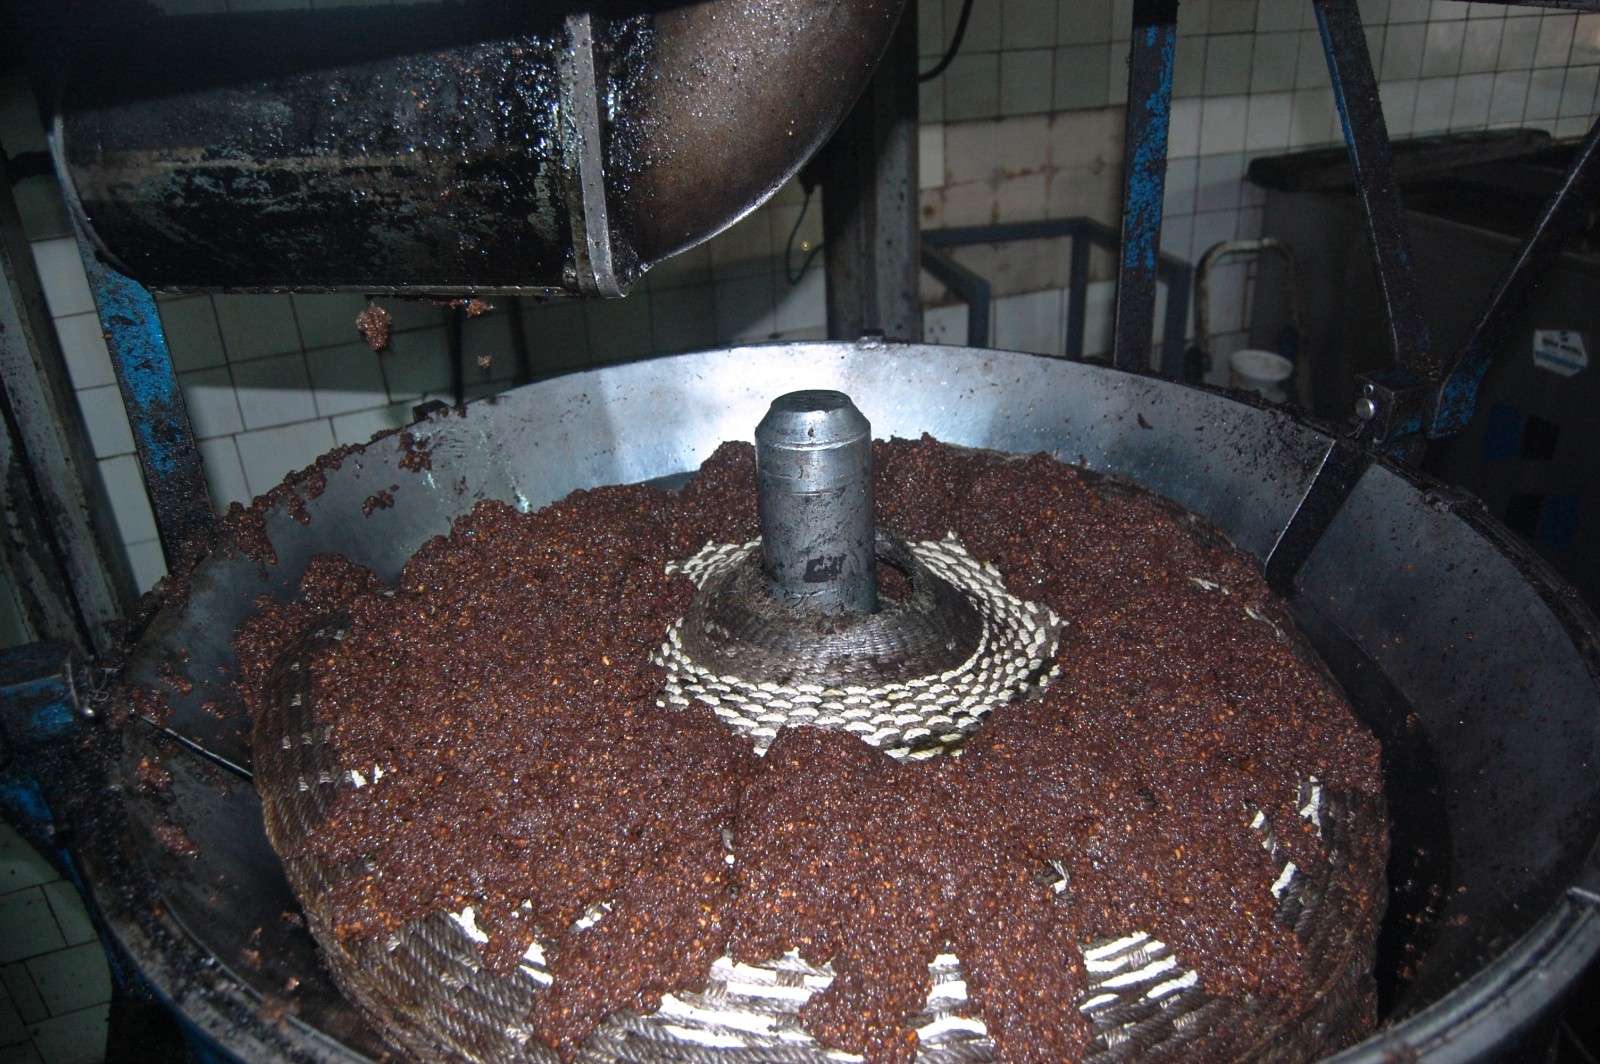 Putting crushed mass on the “capachos”.